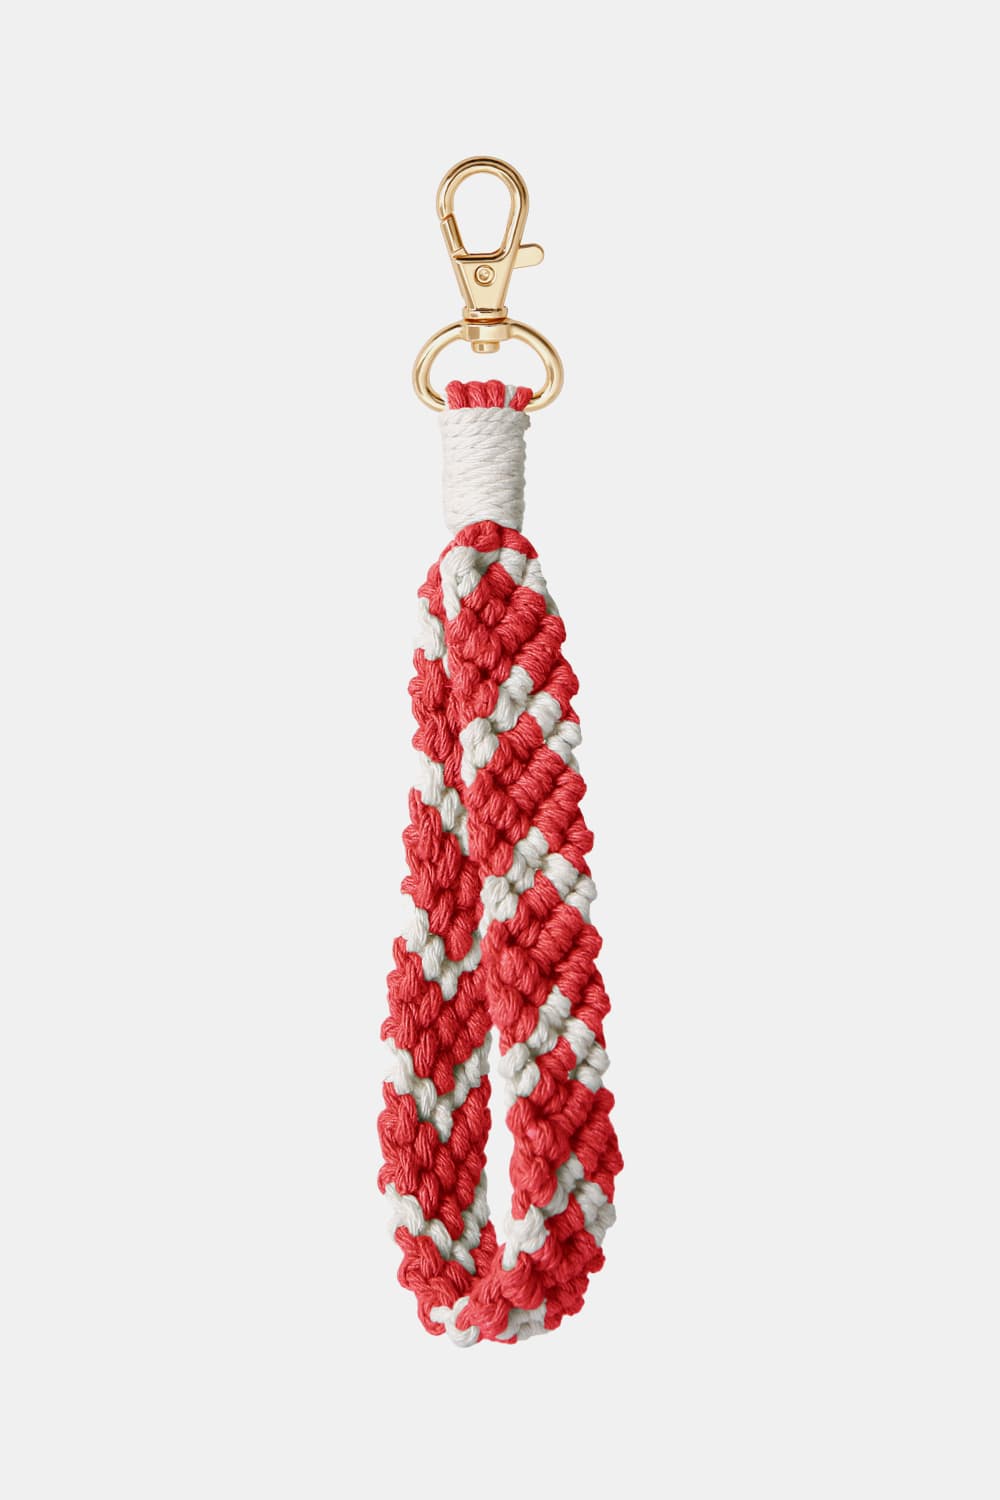 Trendsi Cupid Beauty Supplies Red / One Size Keychains Macrame Wristlet Key Chain